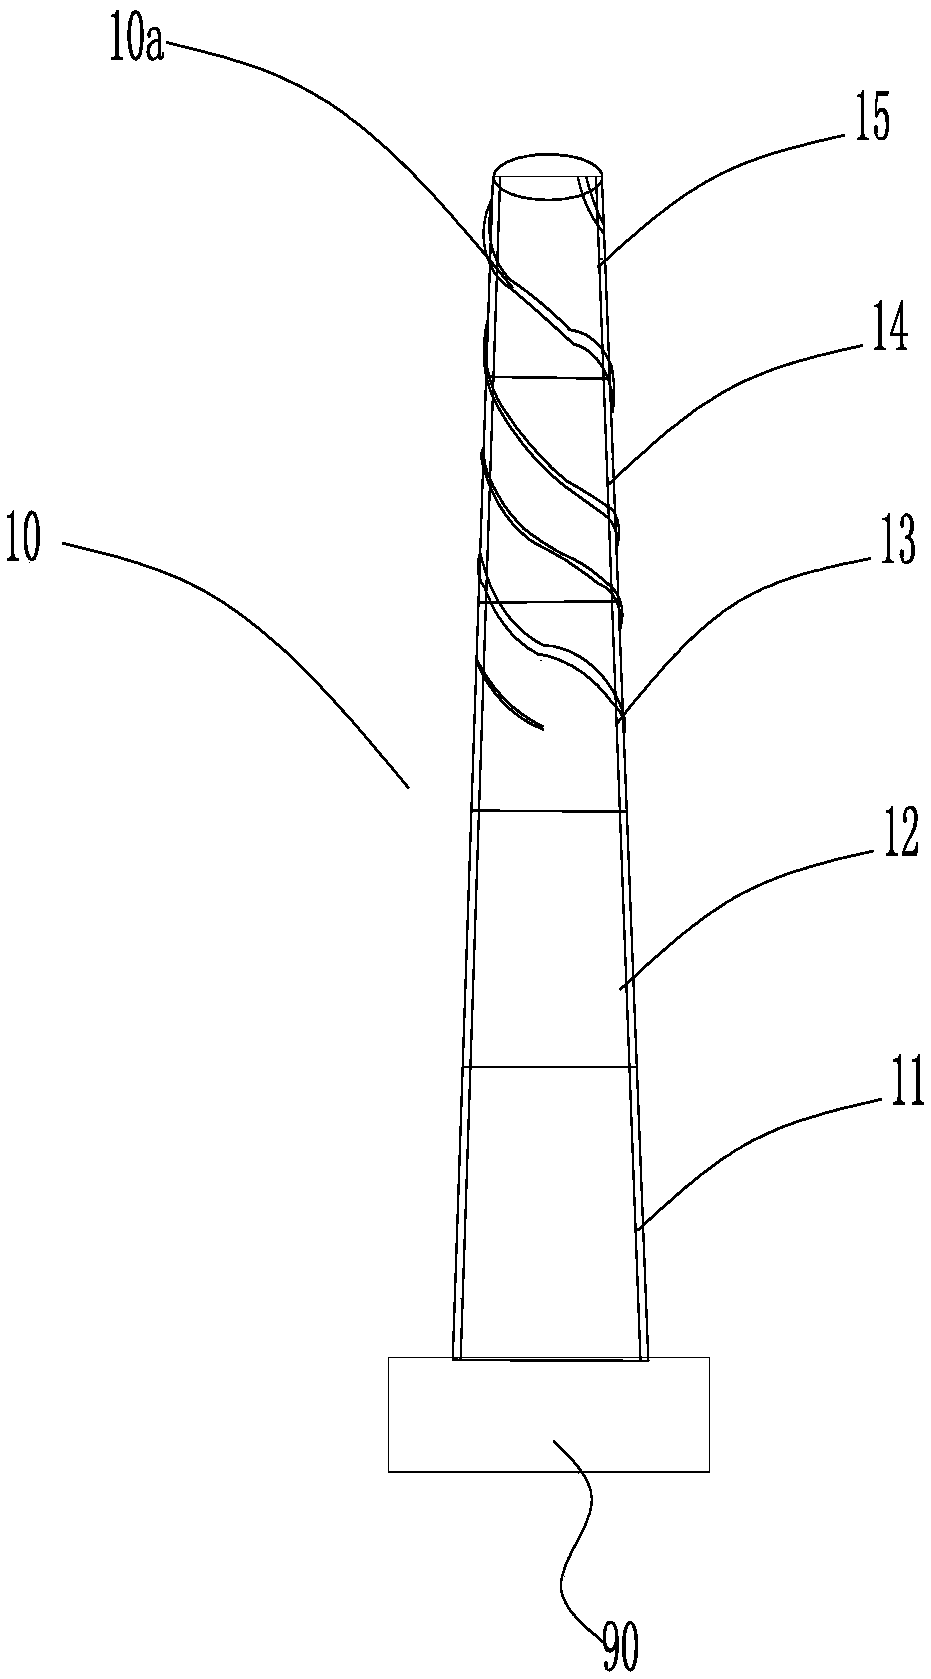 Streamline body and equipment for restraining vibration of enclosure structure and tower barrel hoisting method